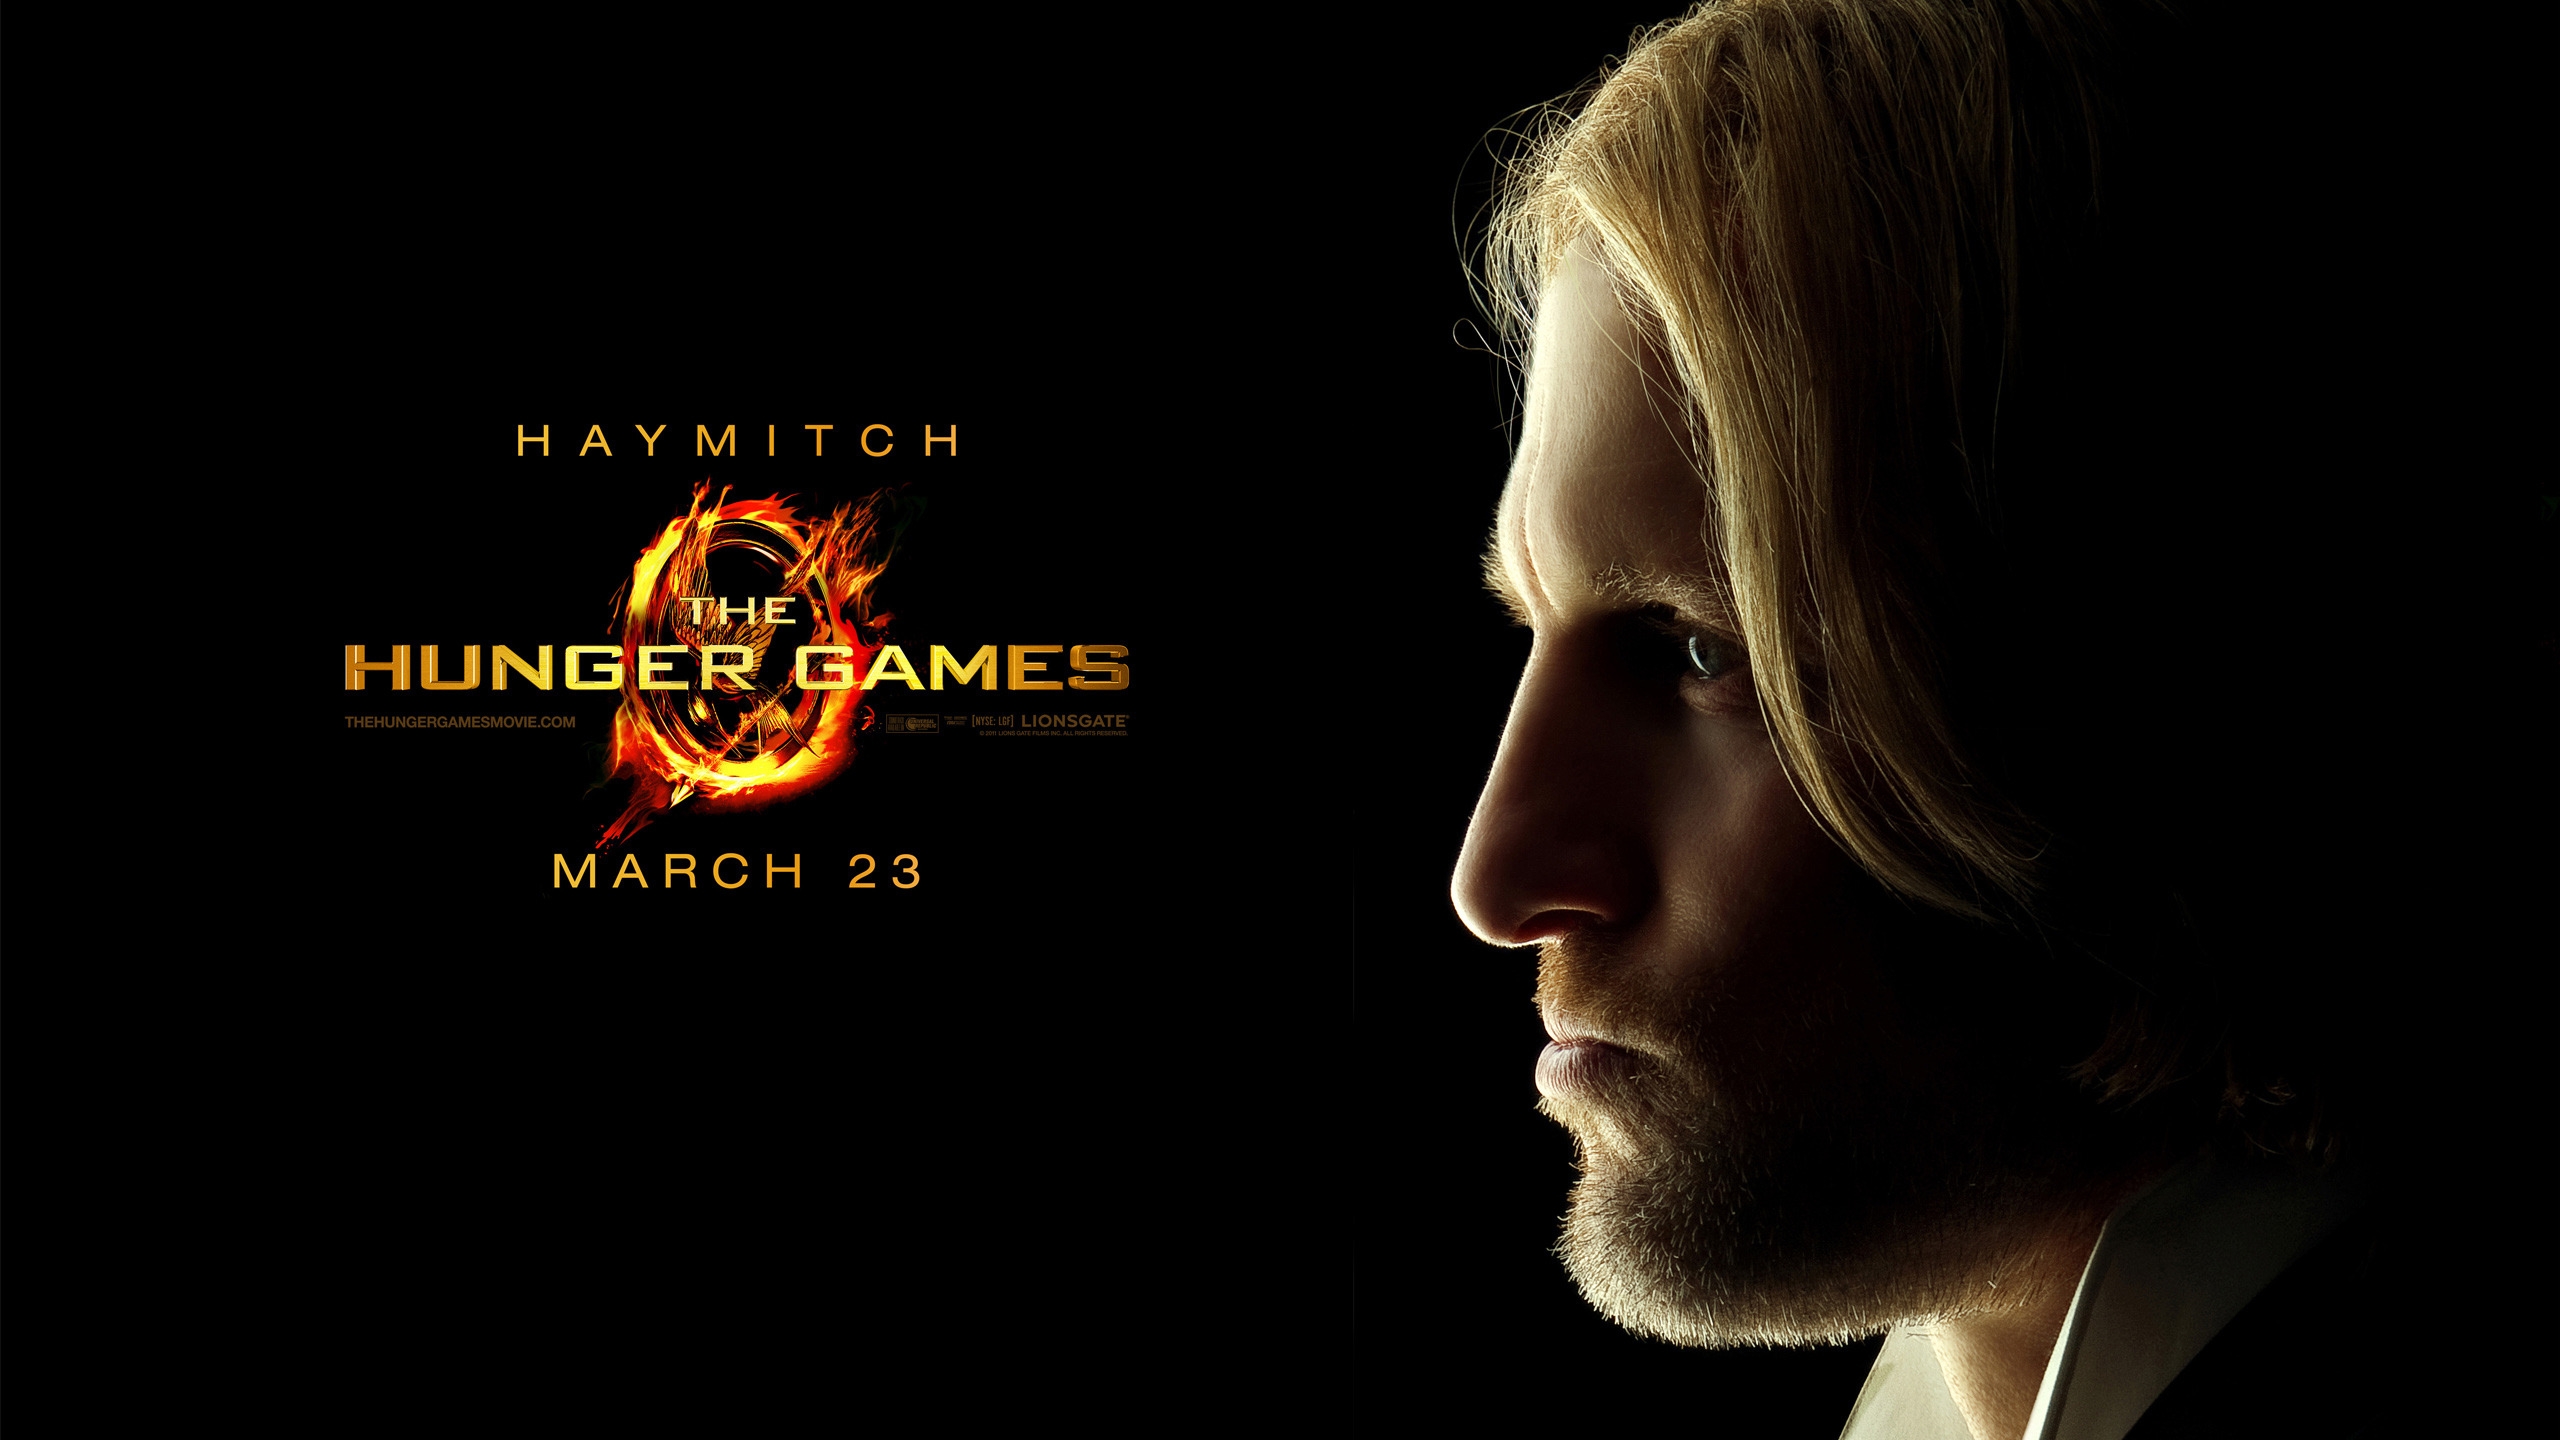 The Hunger Games Haymitch for 2560x1440 HDTV resolution